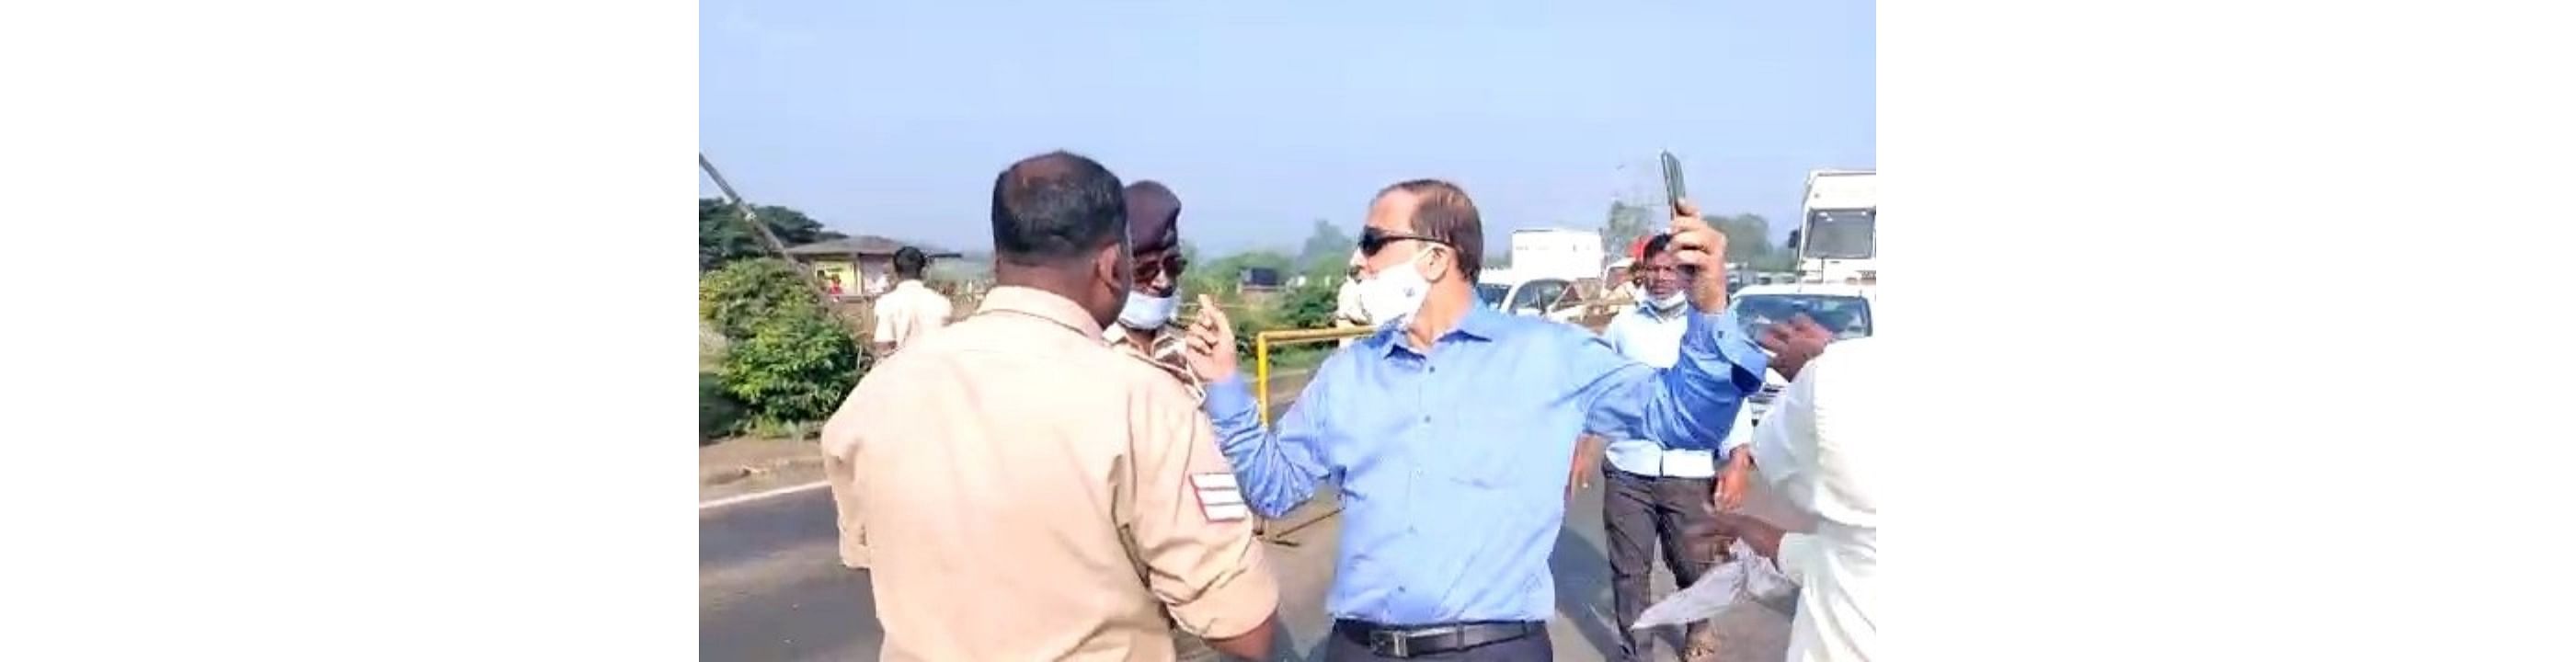 A doctor travelling in his private vehicle from Maharashtra got into a heated exchange with the police. Credit: DH Photo